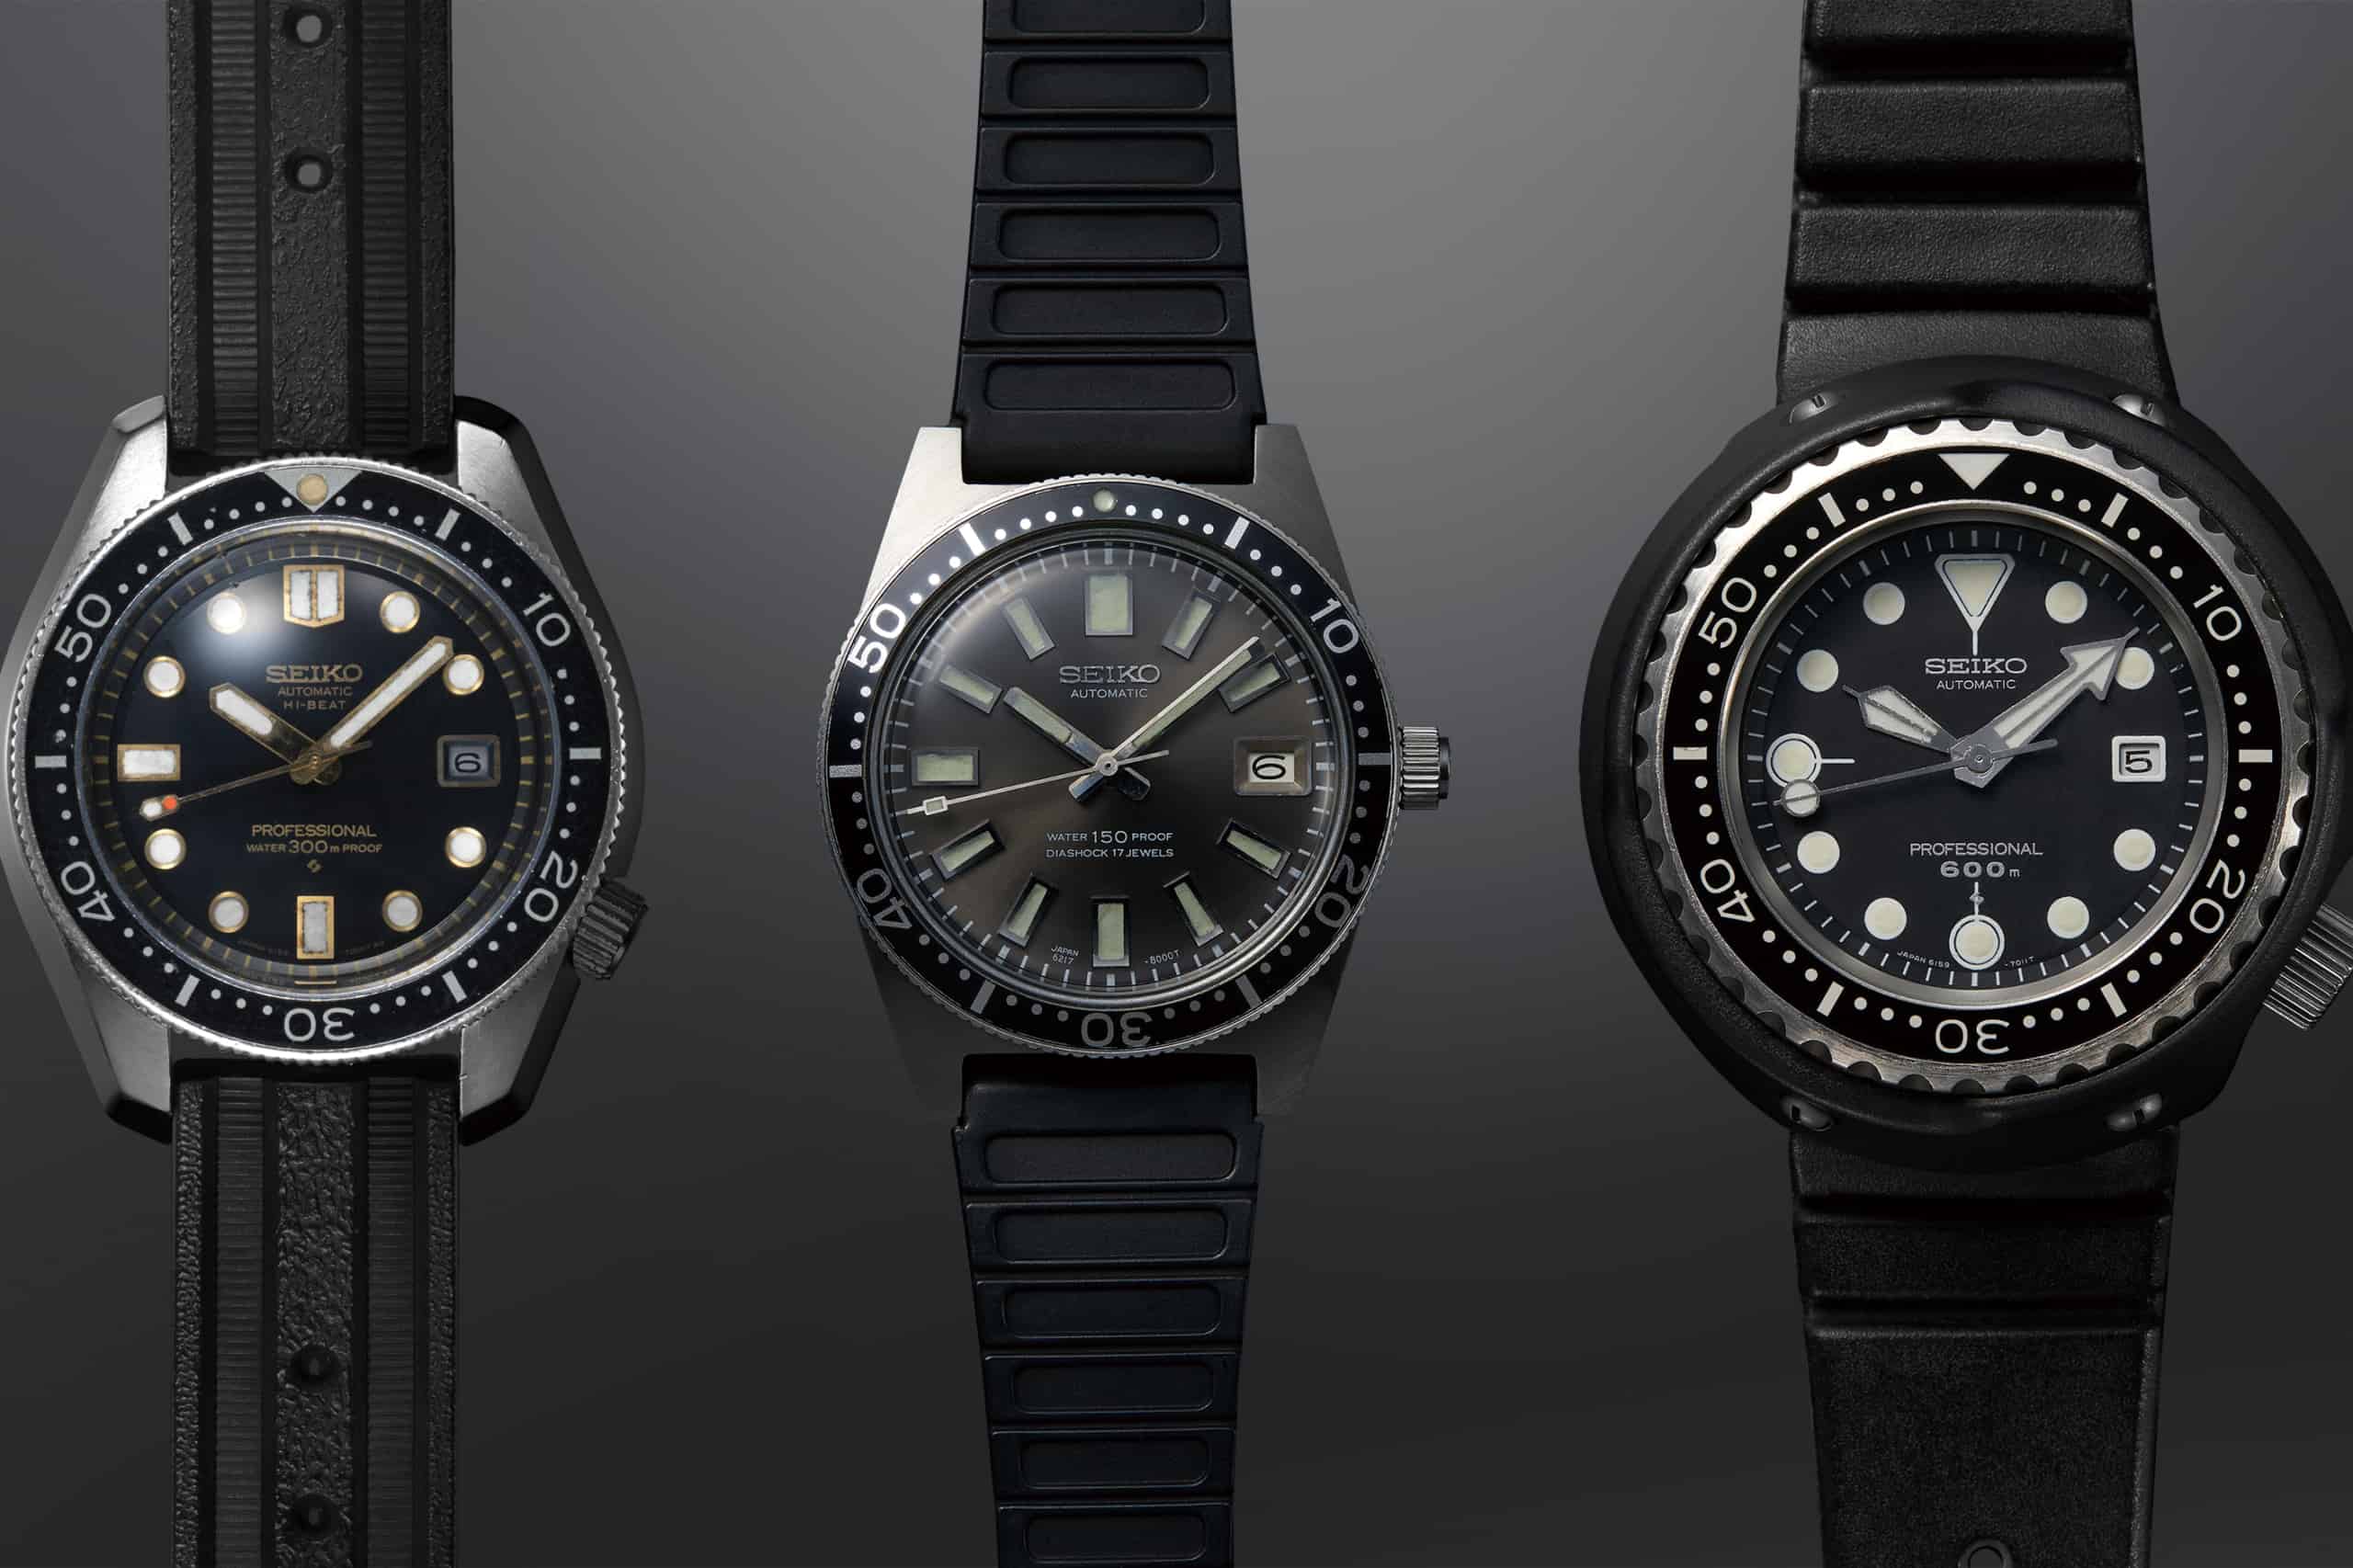 Original_divers_watches-scaled.jpg